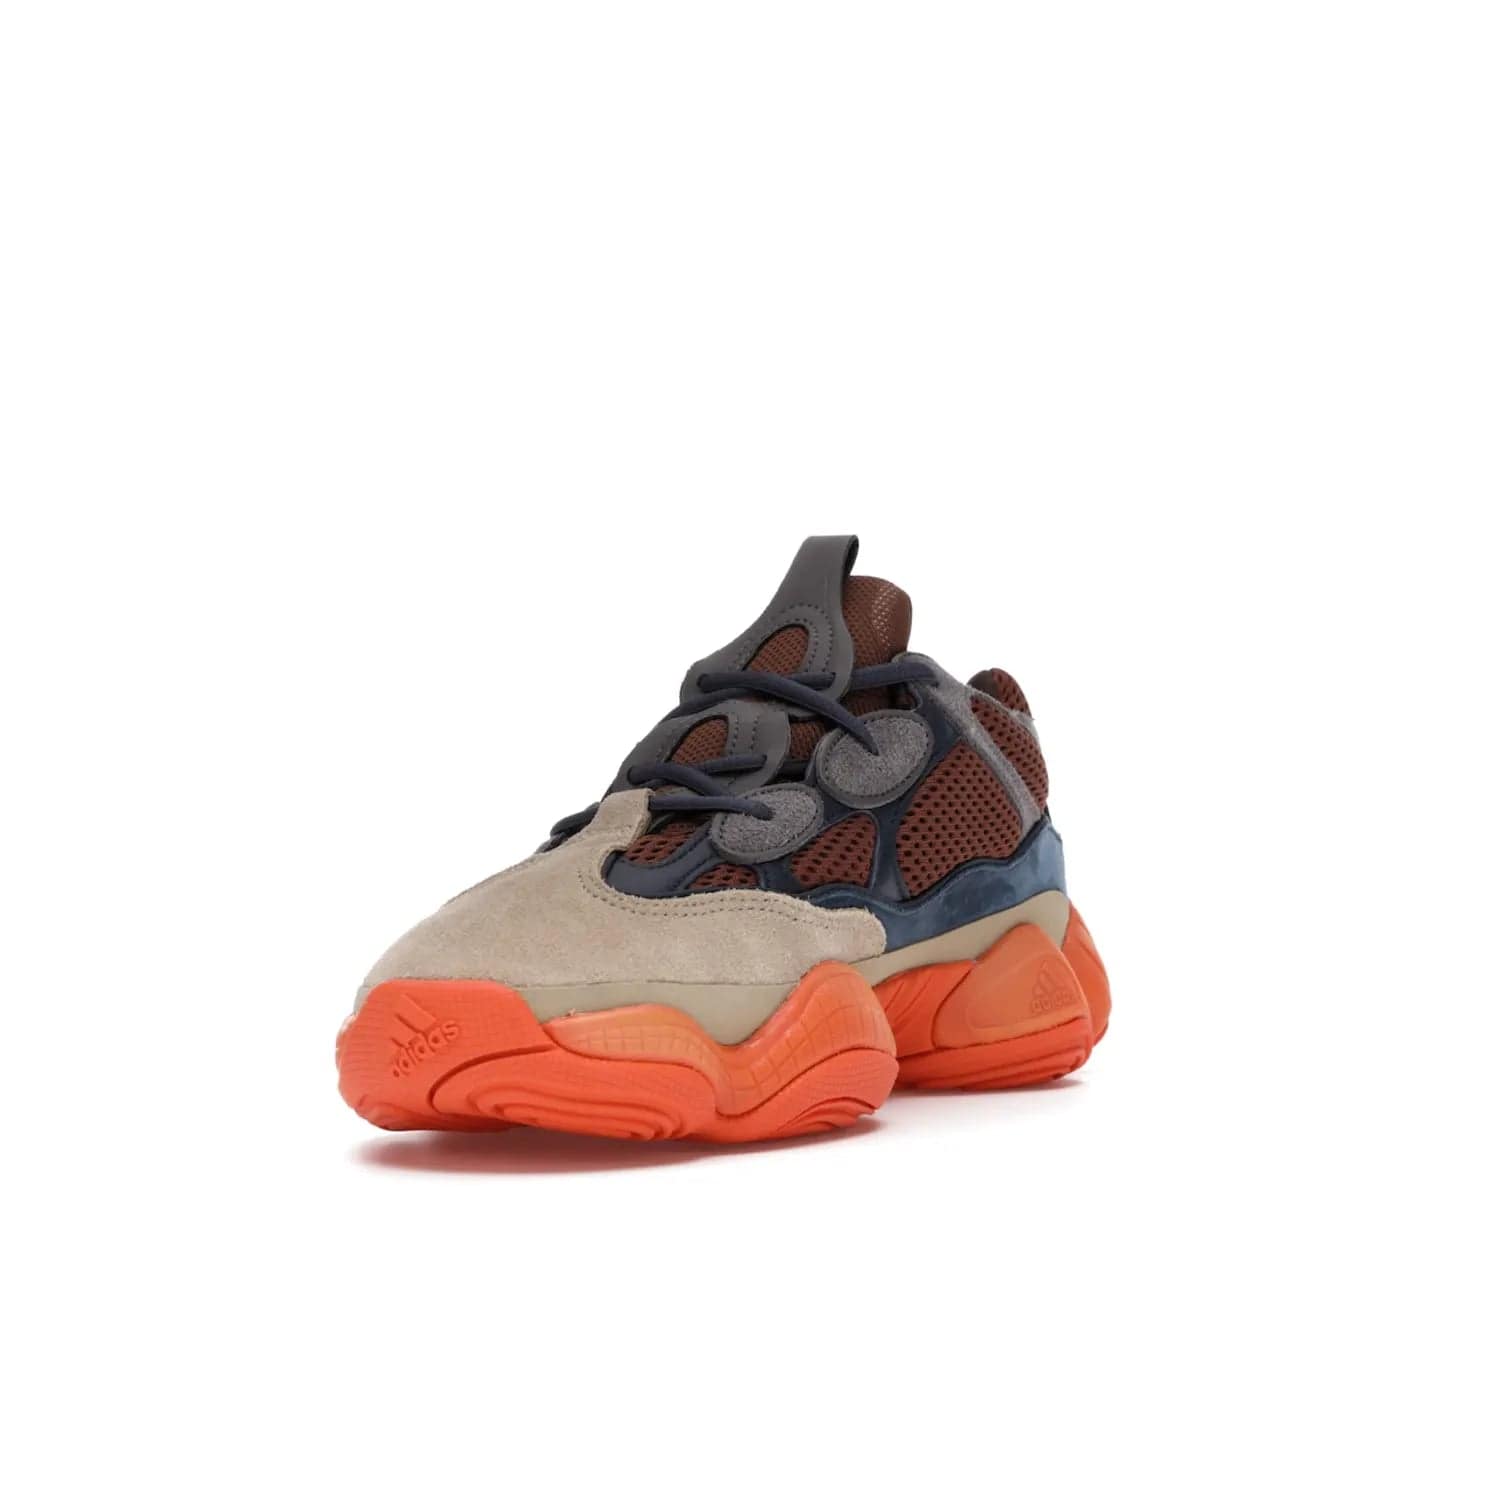 adidas Yeezy 500 Enflame - Image 13 - Only at www.BallersClubKickz.com - Step into style with the adidas Yeezy 500 Enflame. Mix of mesh, leather, and suede layered together to create tonal-brown, dark blue, & orange. Orange AdiPRENE sole provides superior cushioning & comfort. Get yours and experience maximum style.